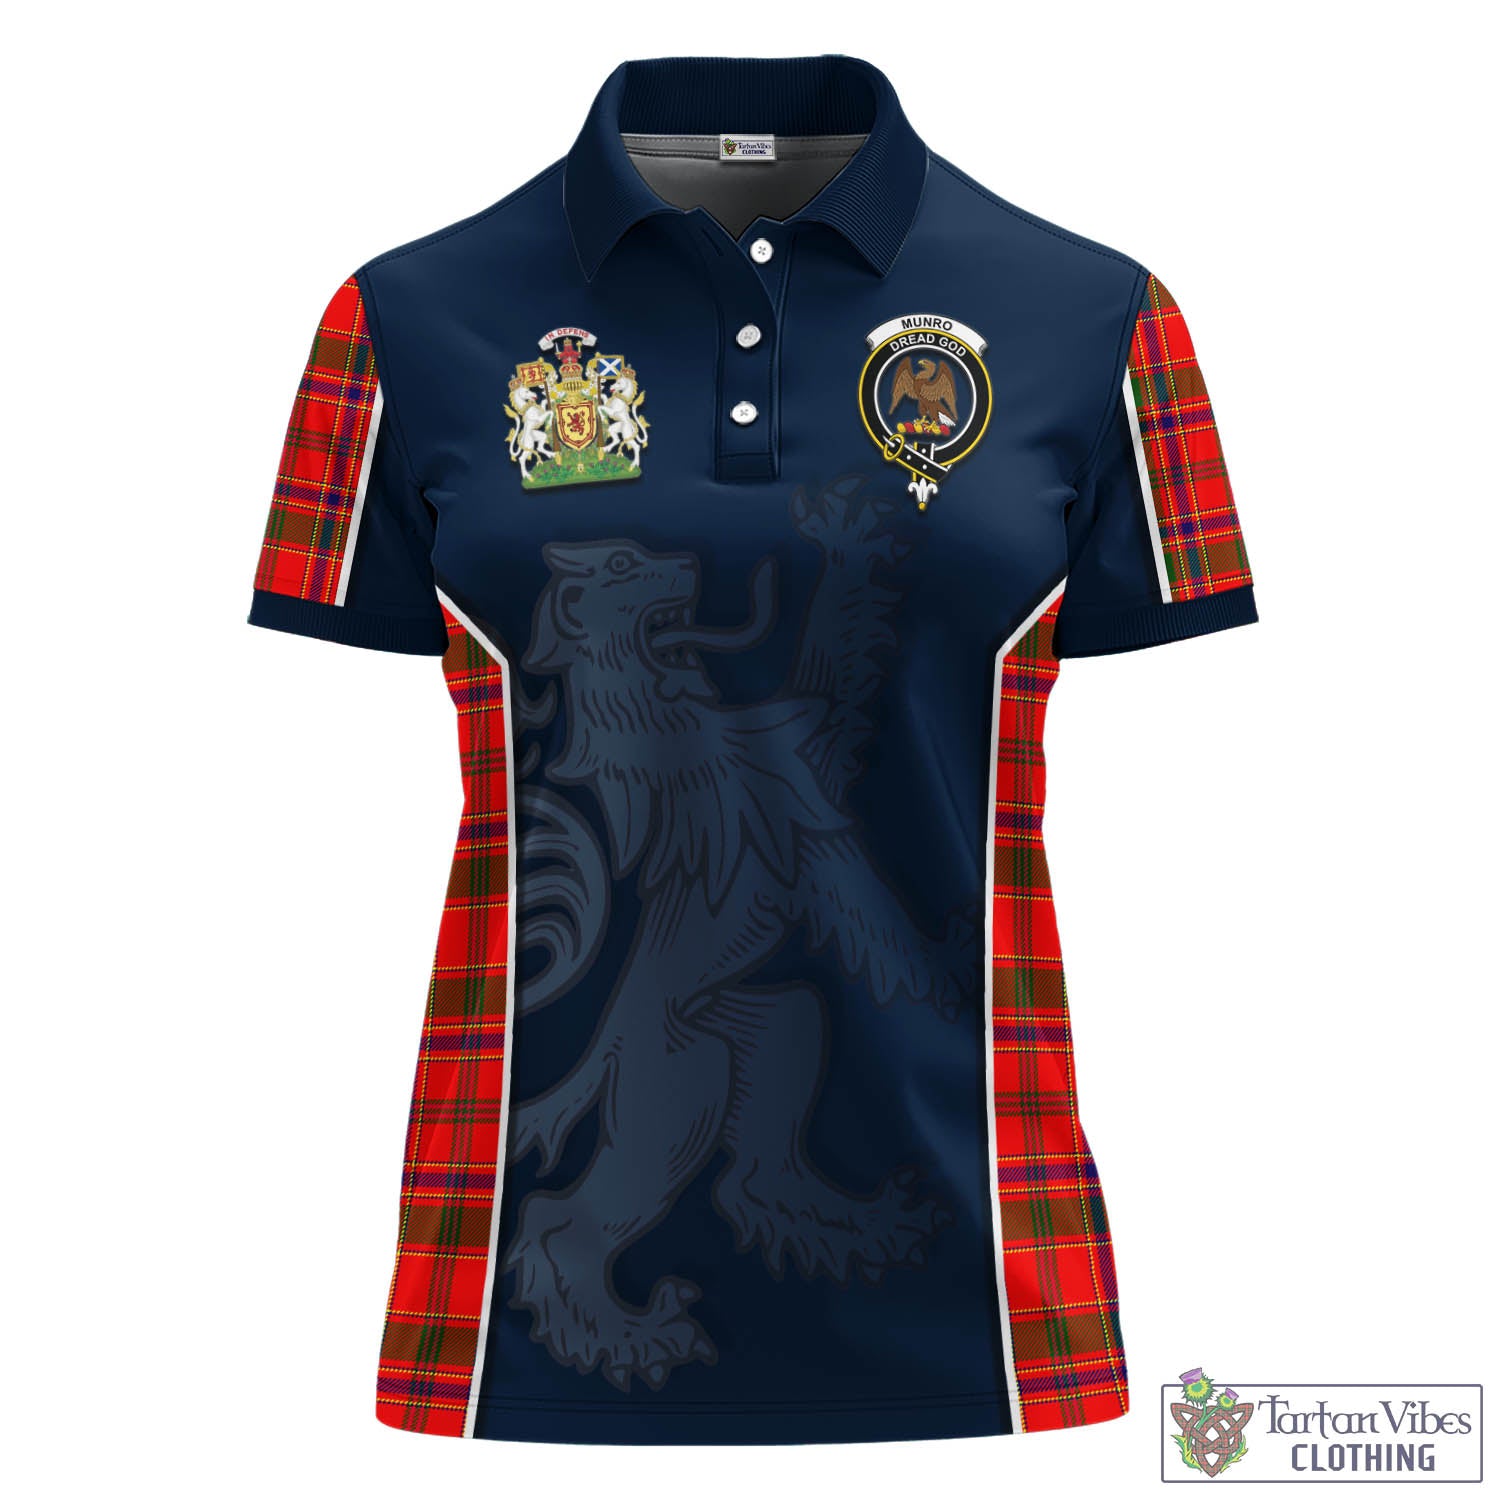 Tartan Vibes Clothing Munro Modern Tartan Women's Polo Shirt with Family Crest and Lion Rampant Vibes Sport Style